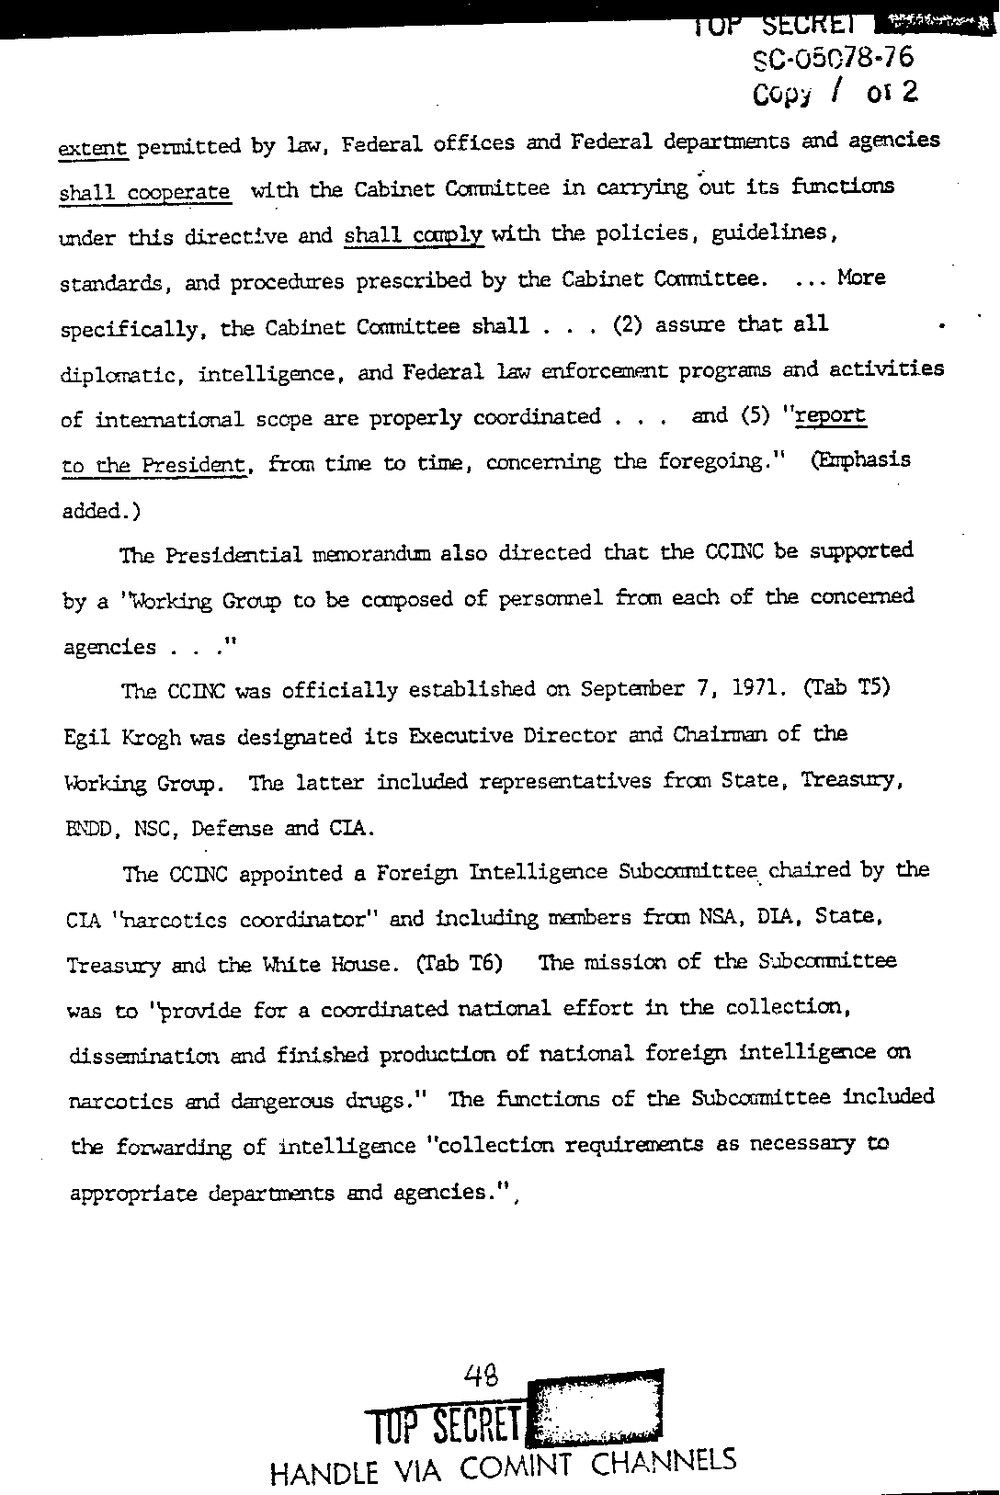 Page 56 from Report on Inquiry Into CIA Related Electronic Surveillance Activities